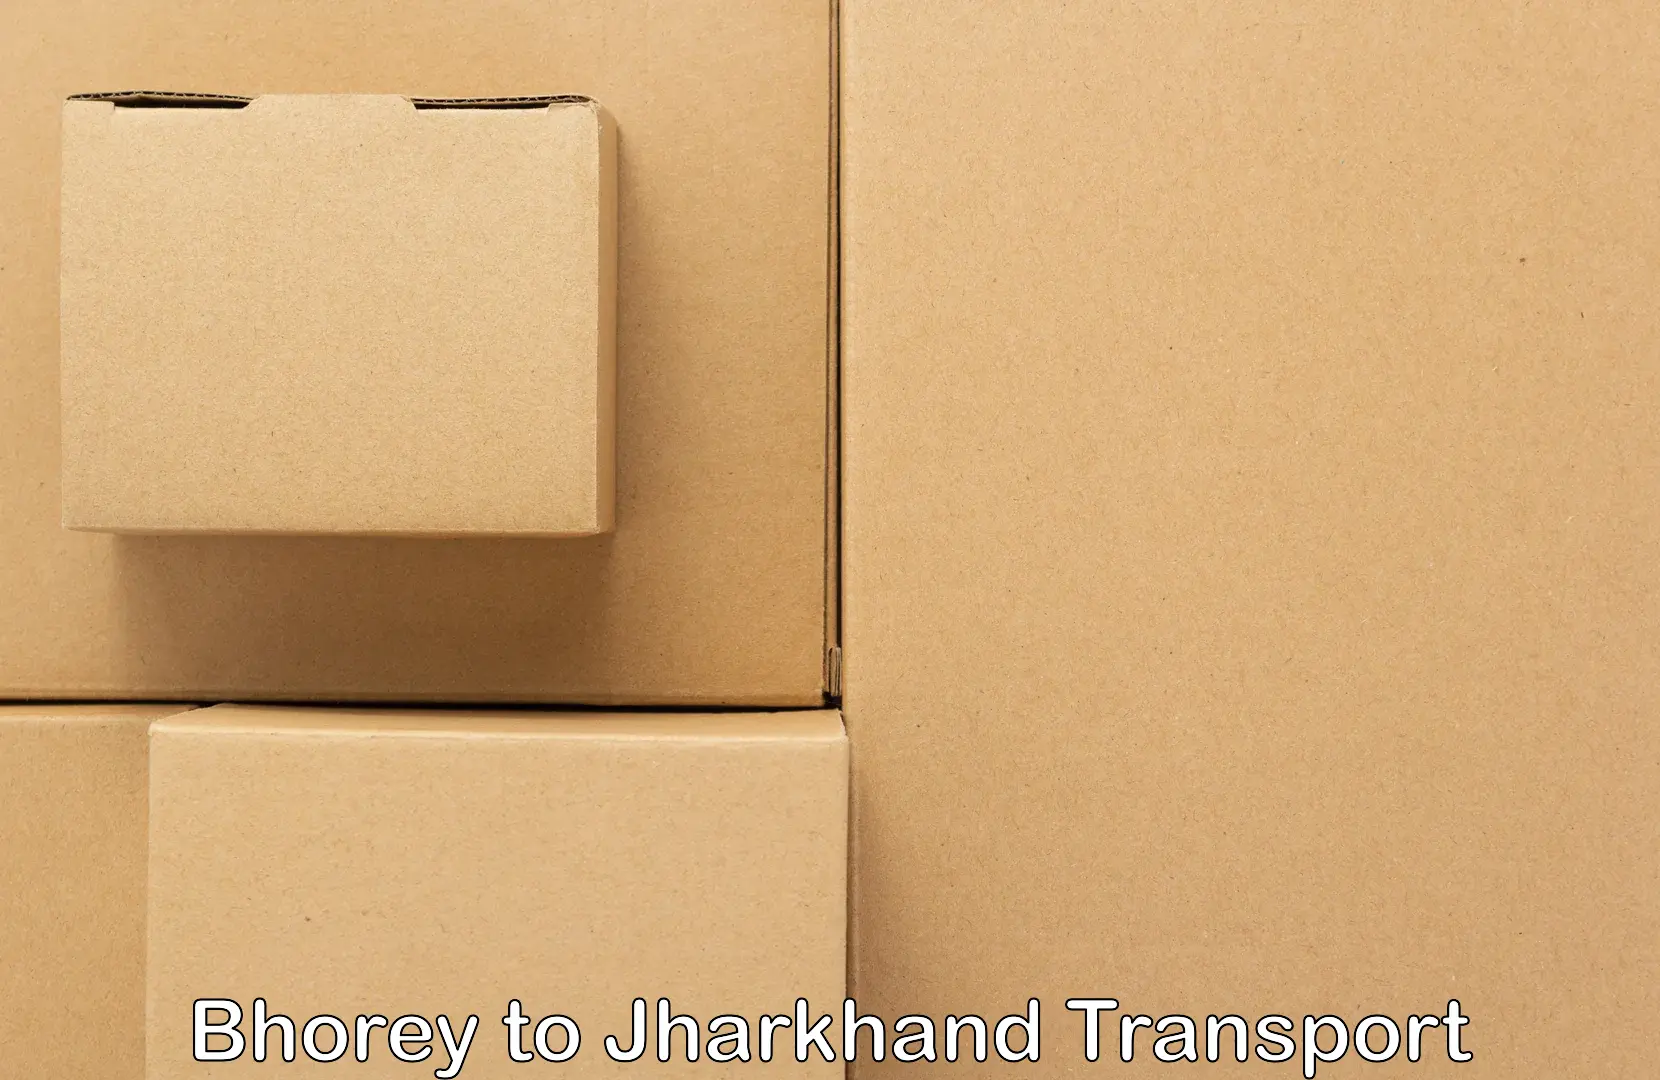 Truck transport companies in India Bhorey to Isri